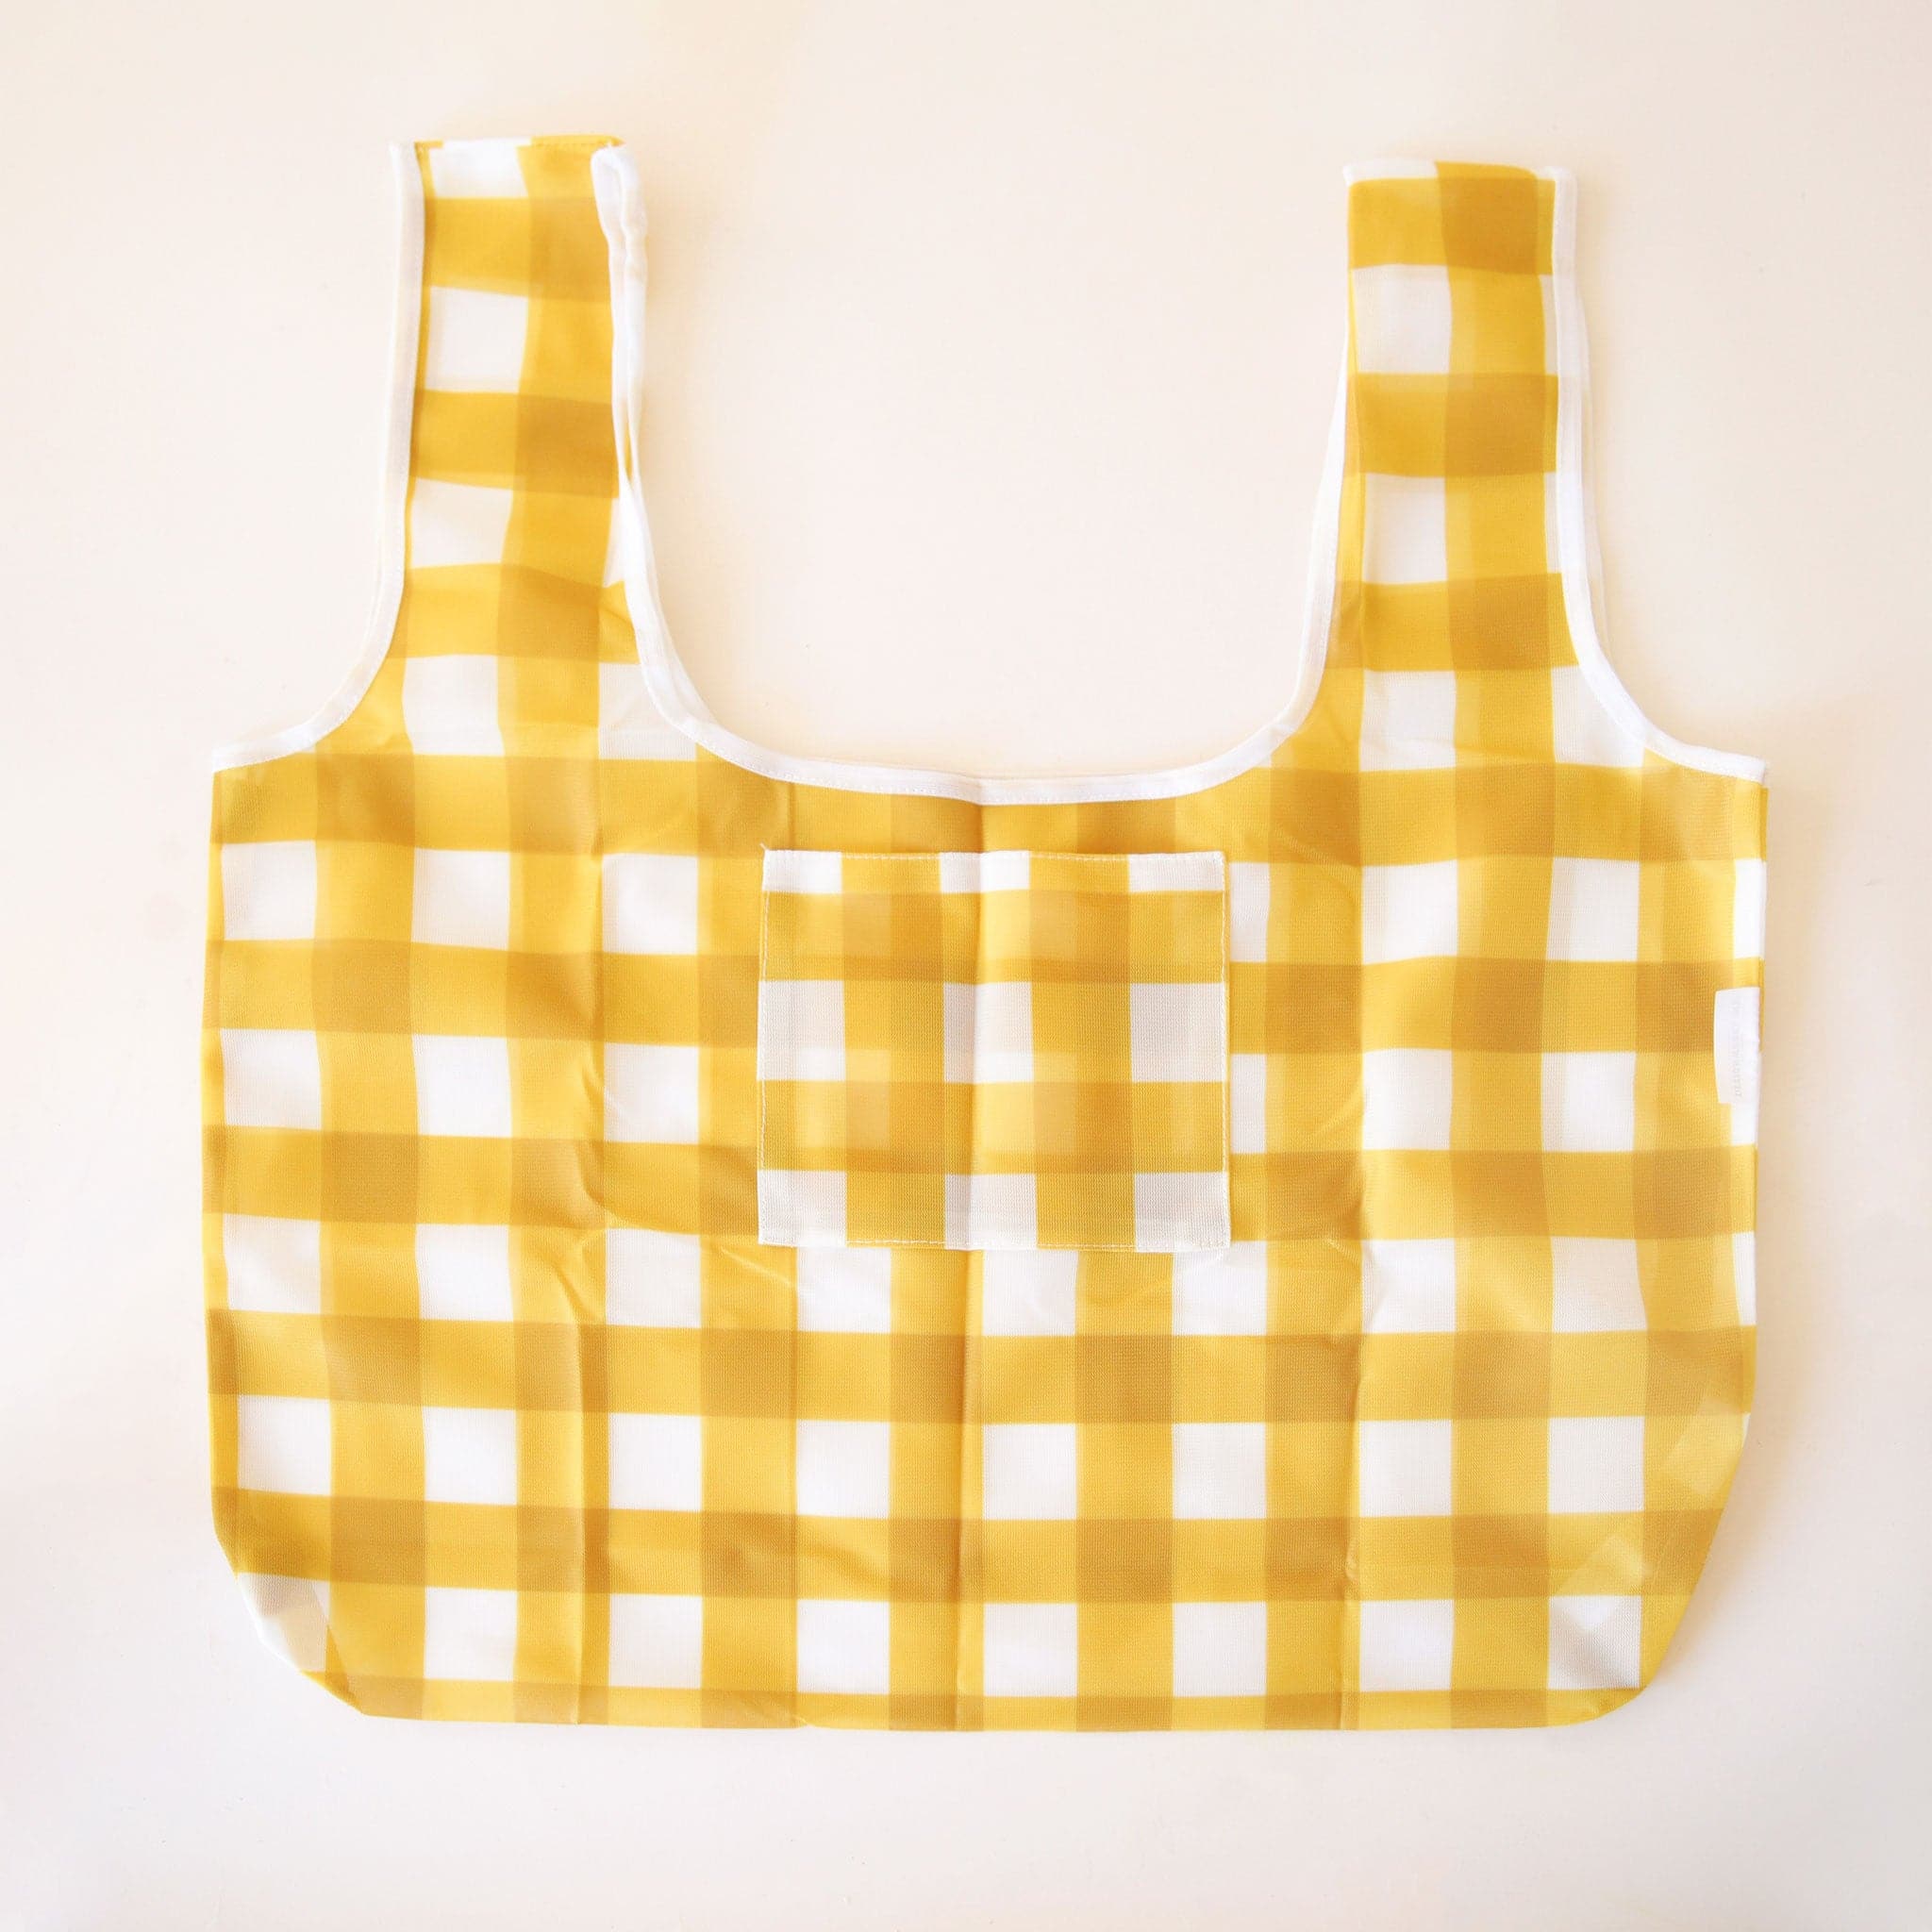 A yellow gingham nylon bag with two straps and a small pocket for keys or any other easy-to-grab essentials.